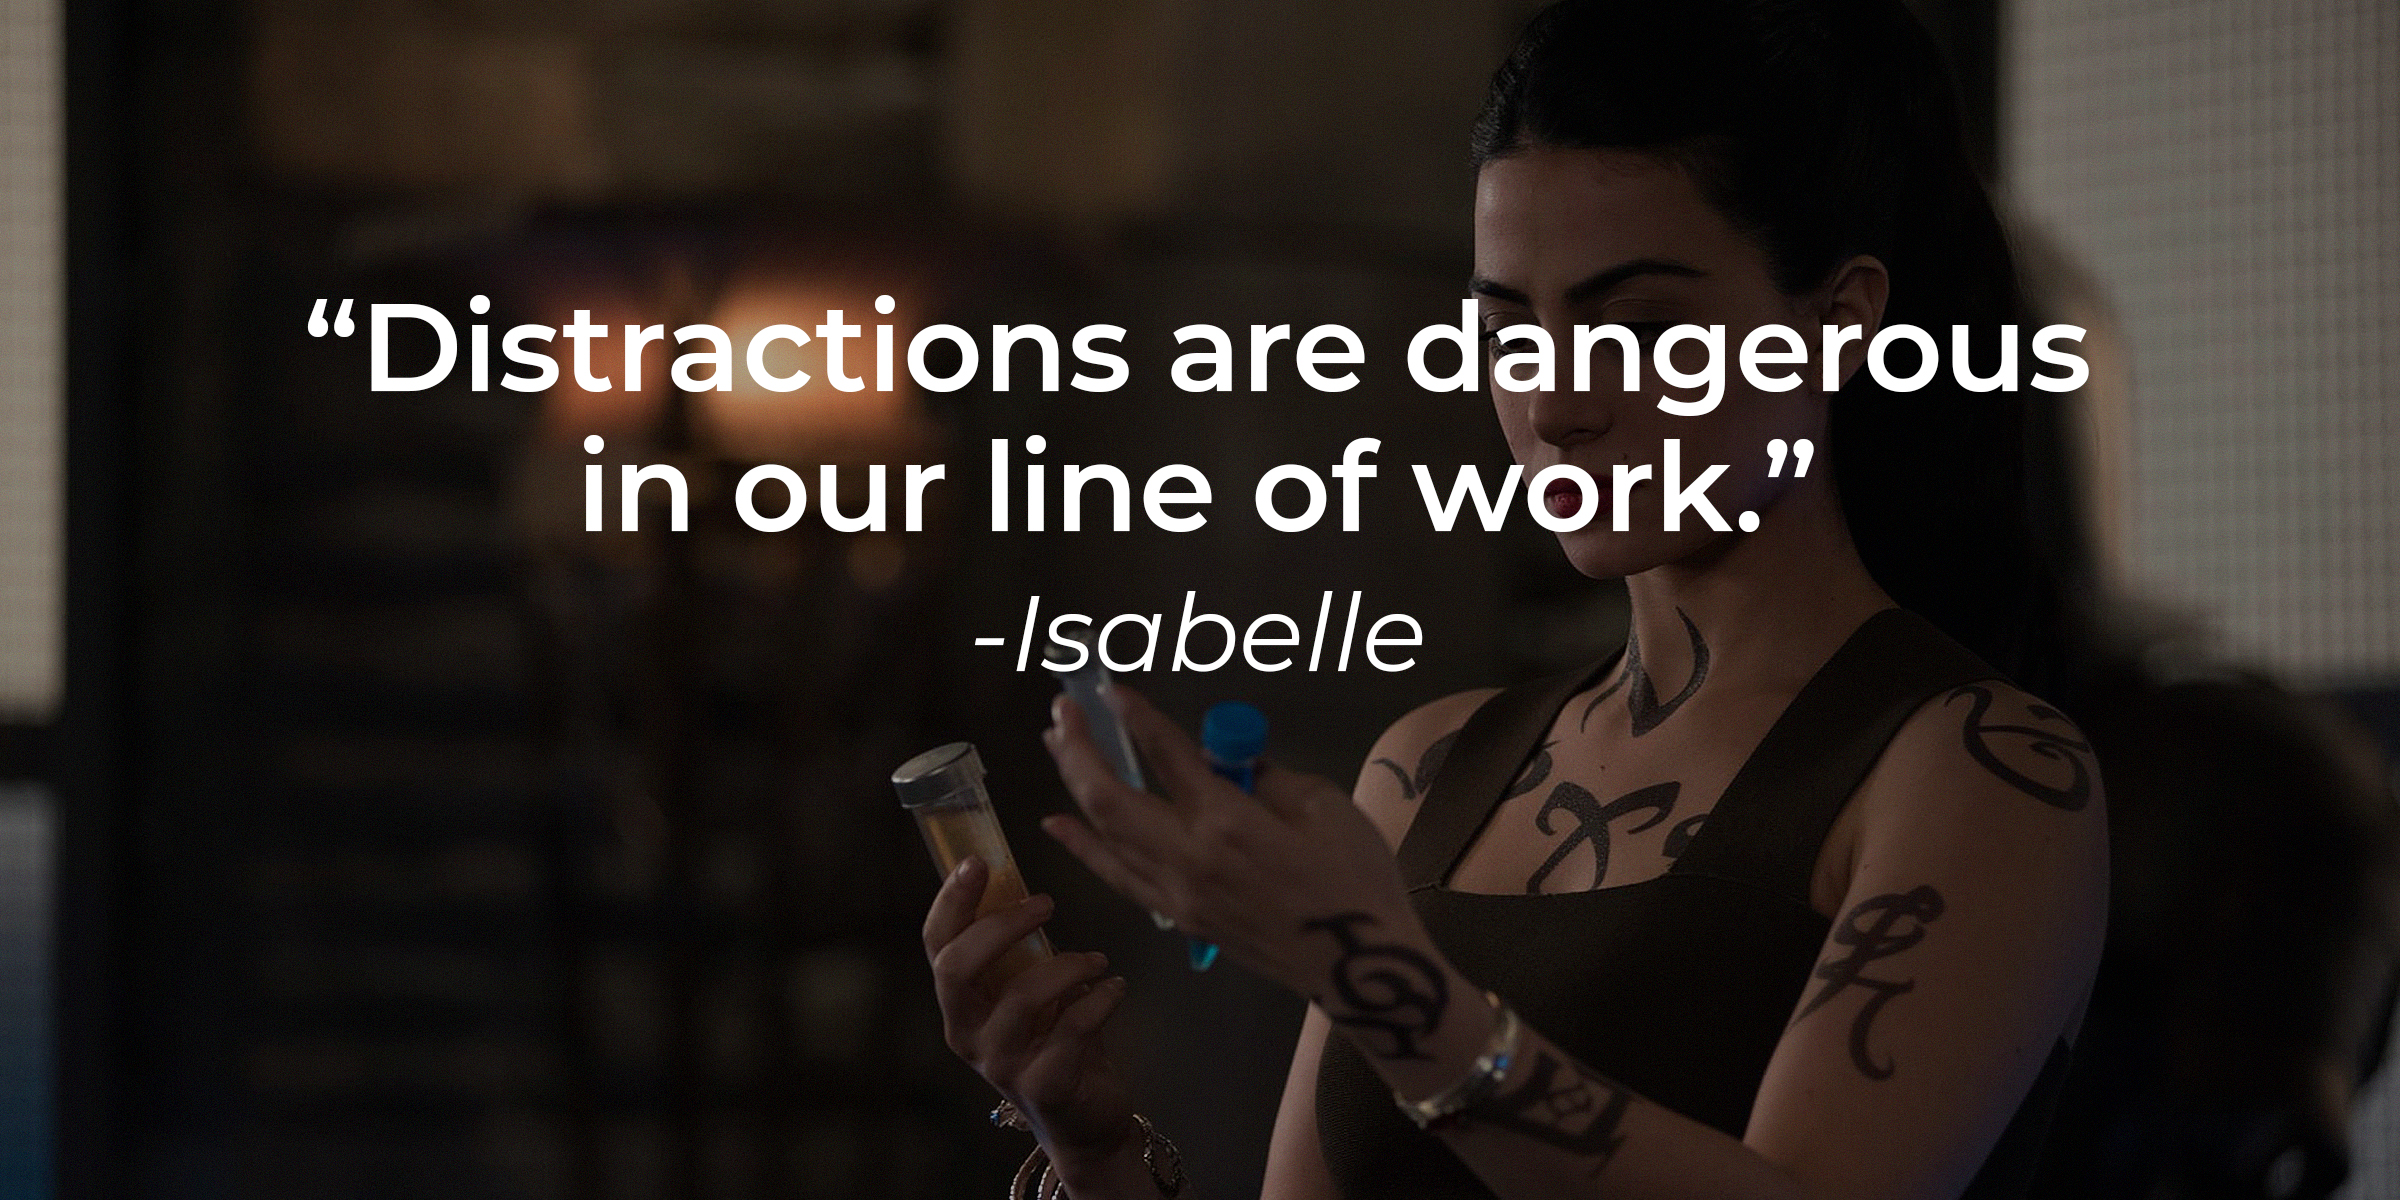 Isabelle with her quote: "Distractions are dangerous in our line of work." ┃Source: facebook.com/ShadowhuntersSeries